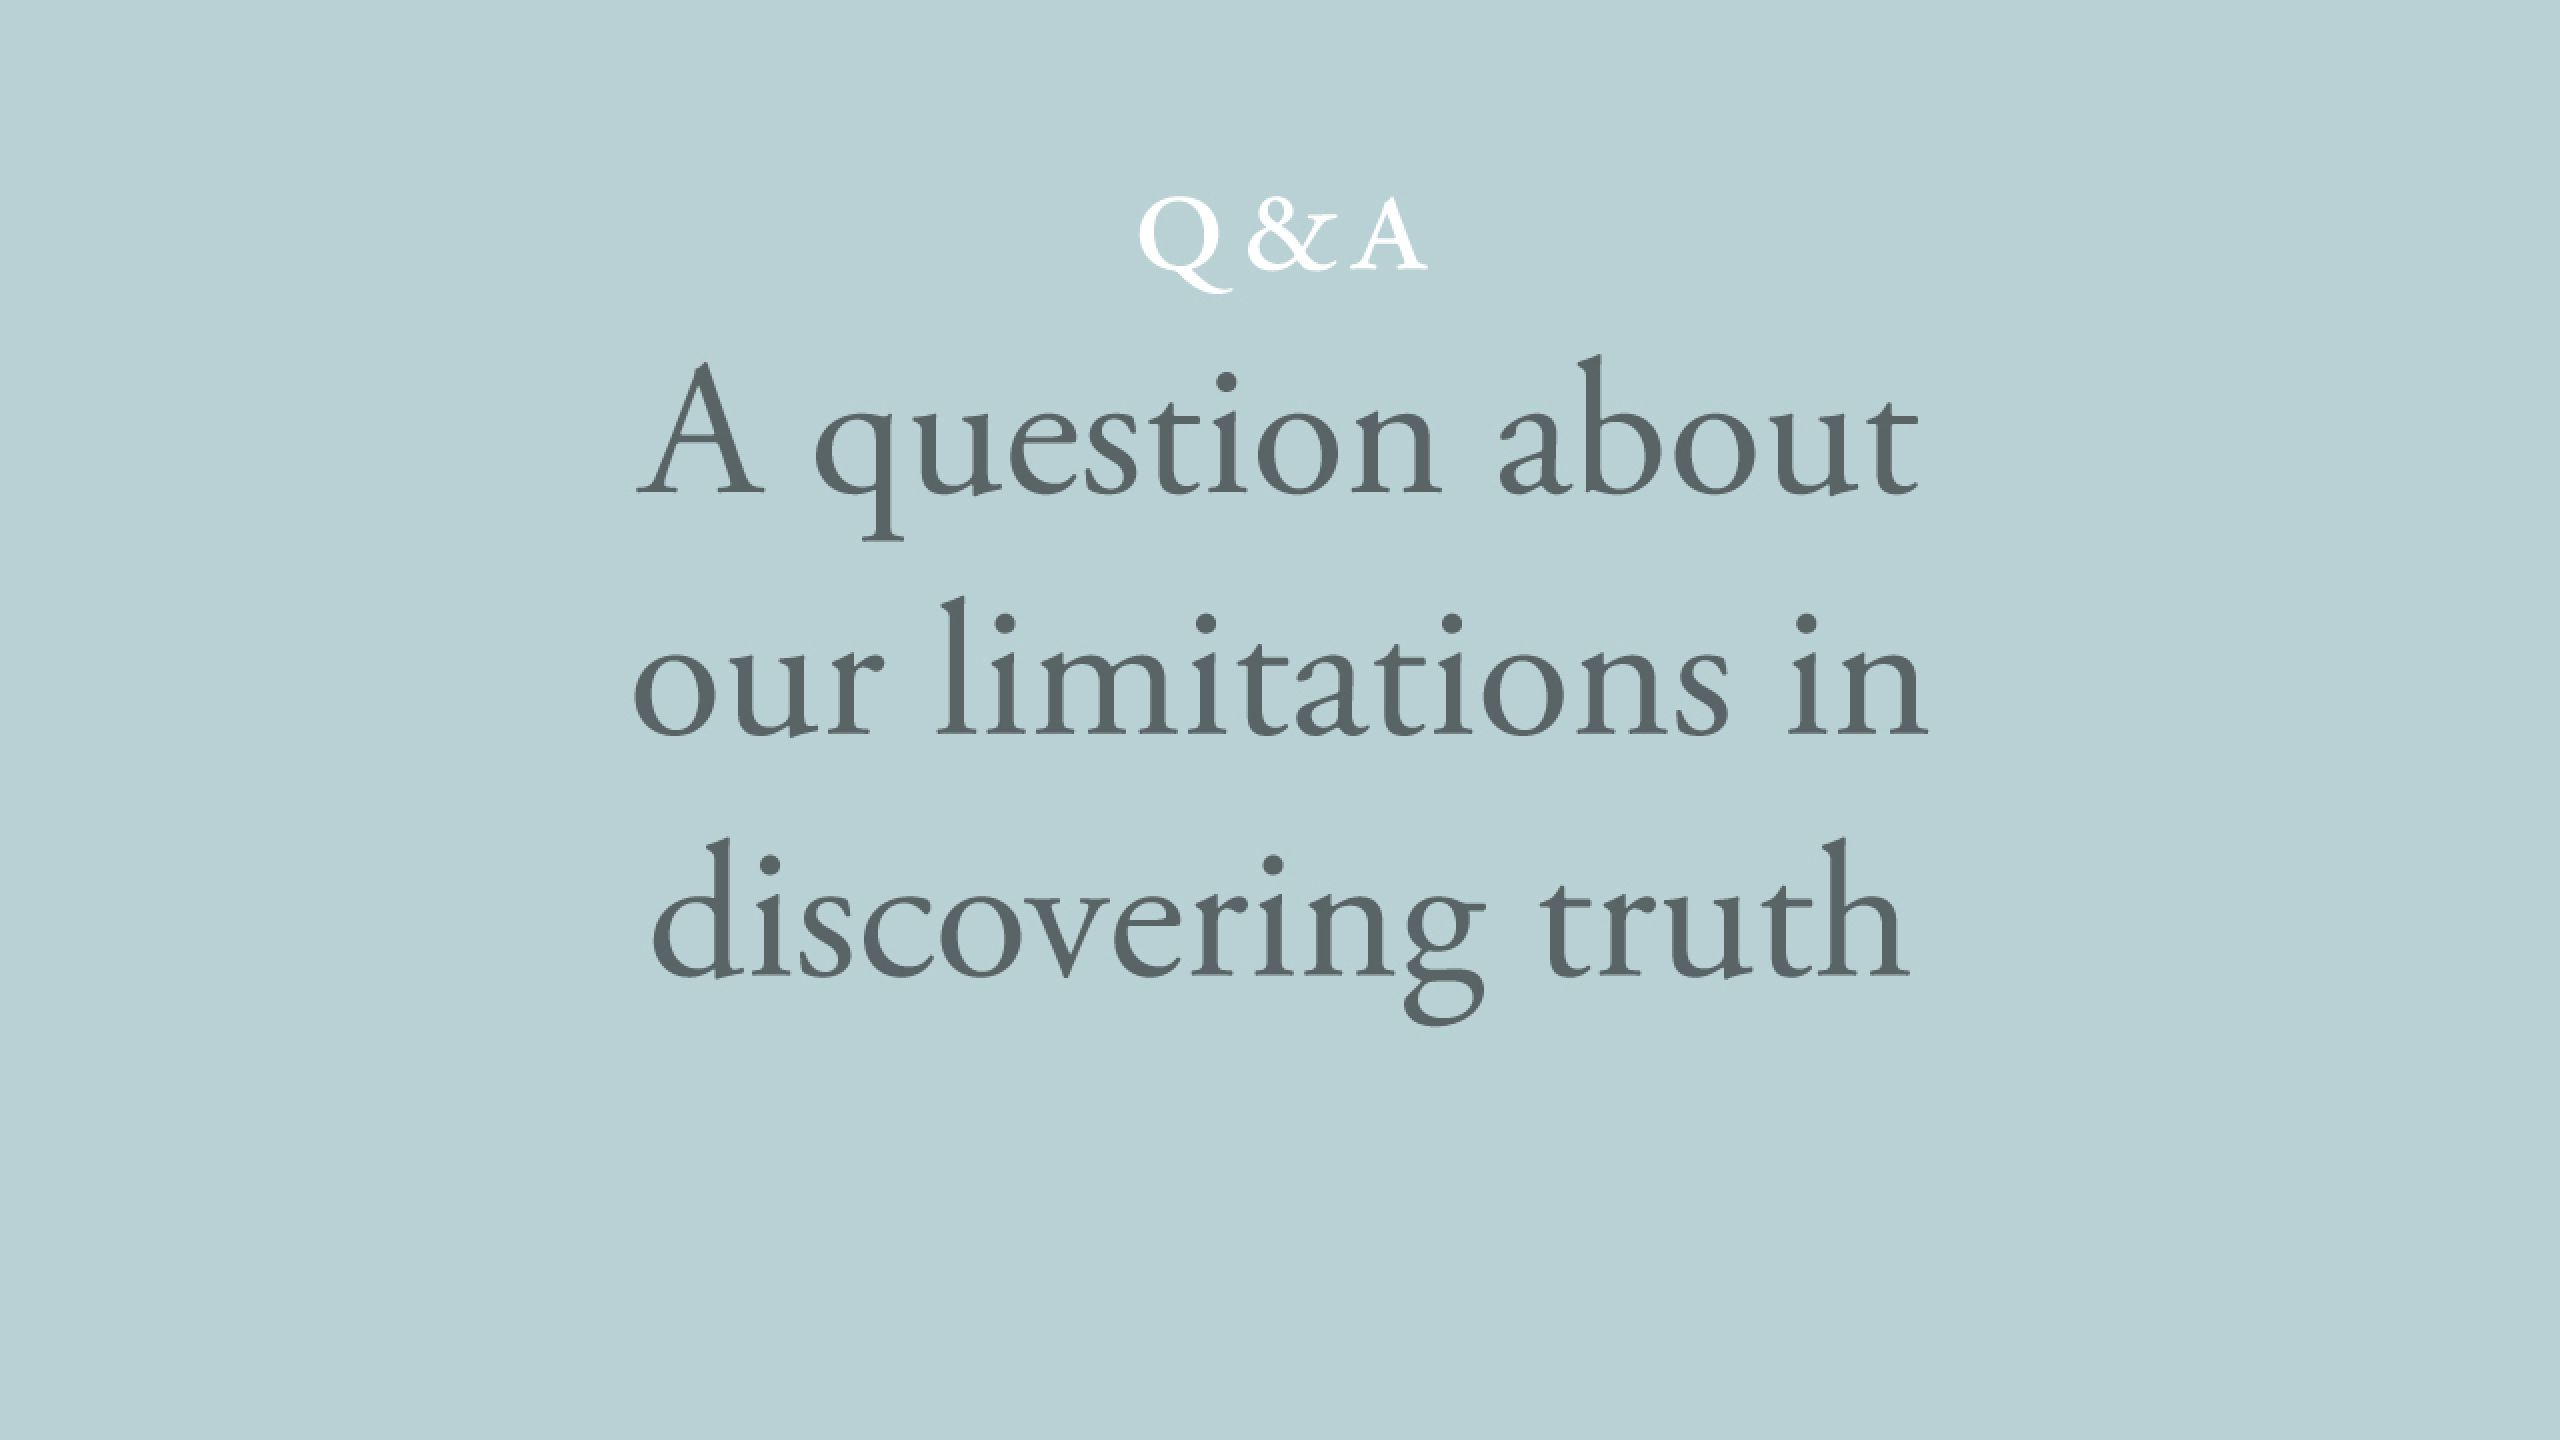 Are we limited by the human senses in our discovery of truth?